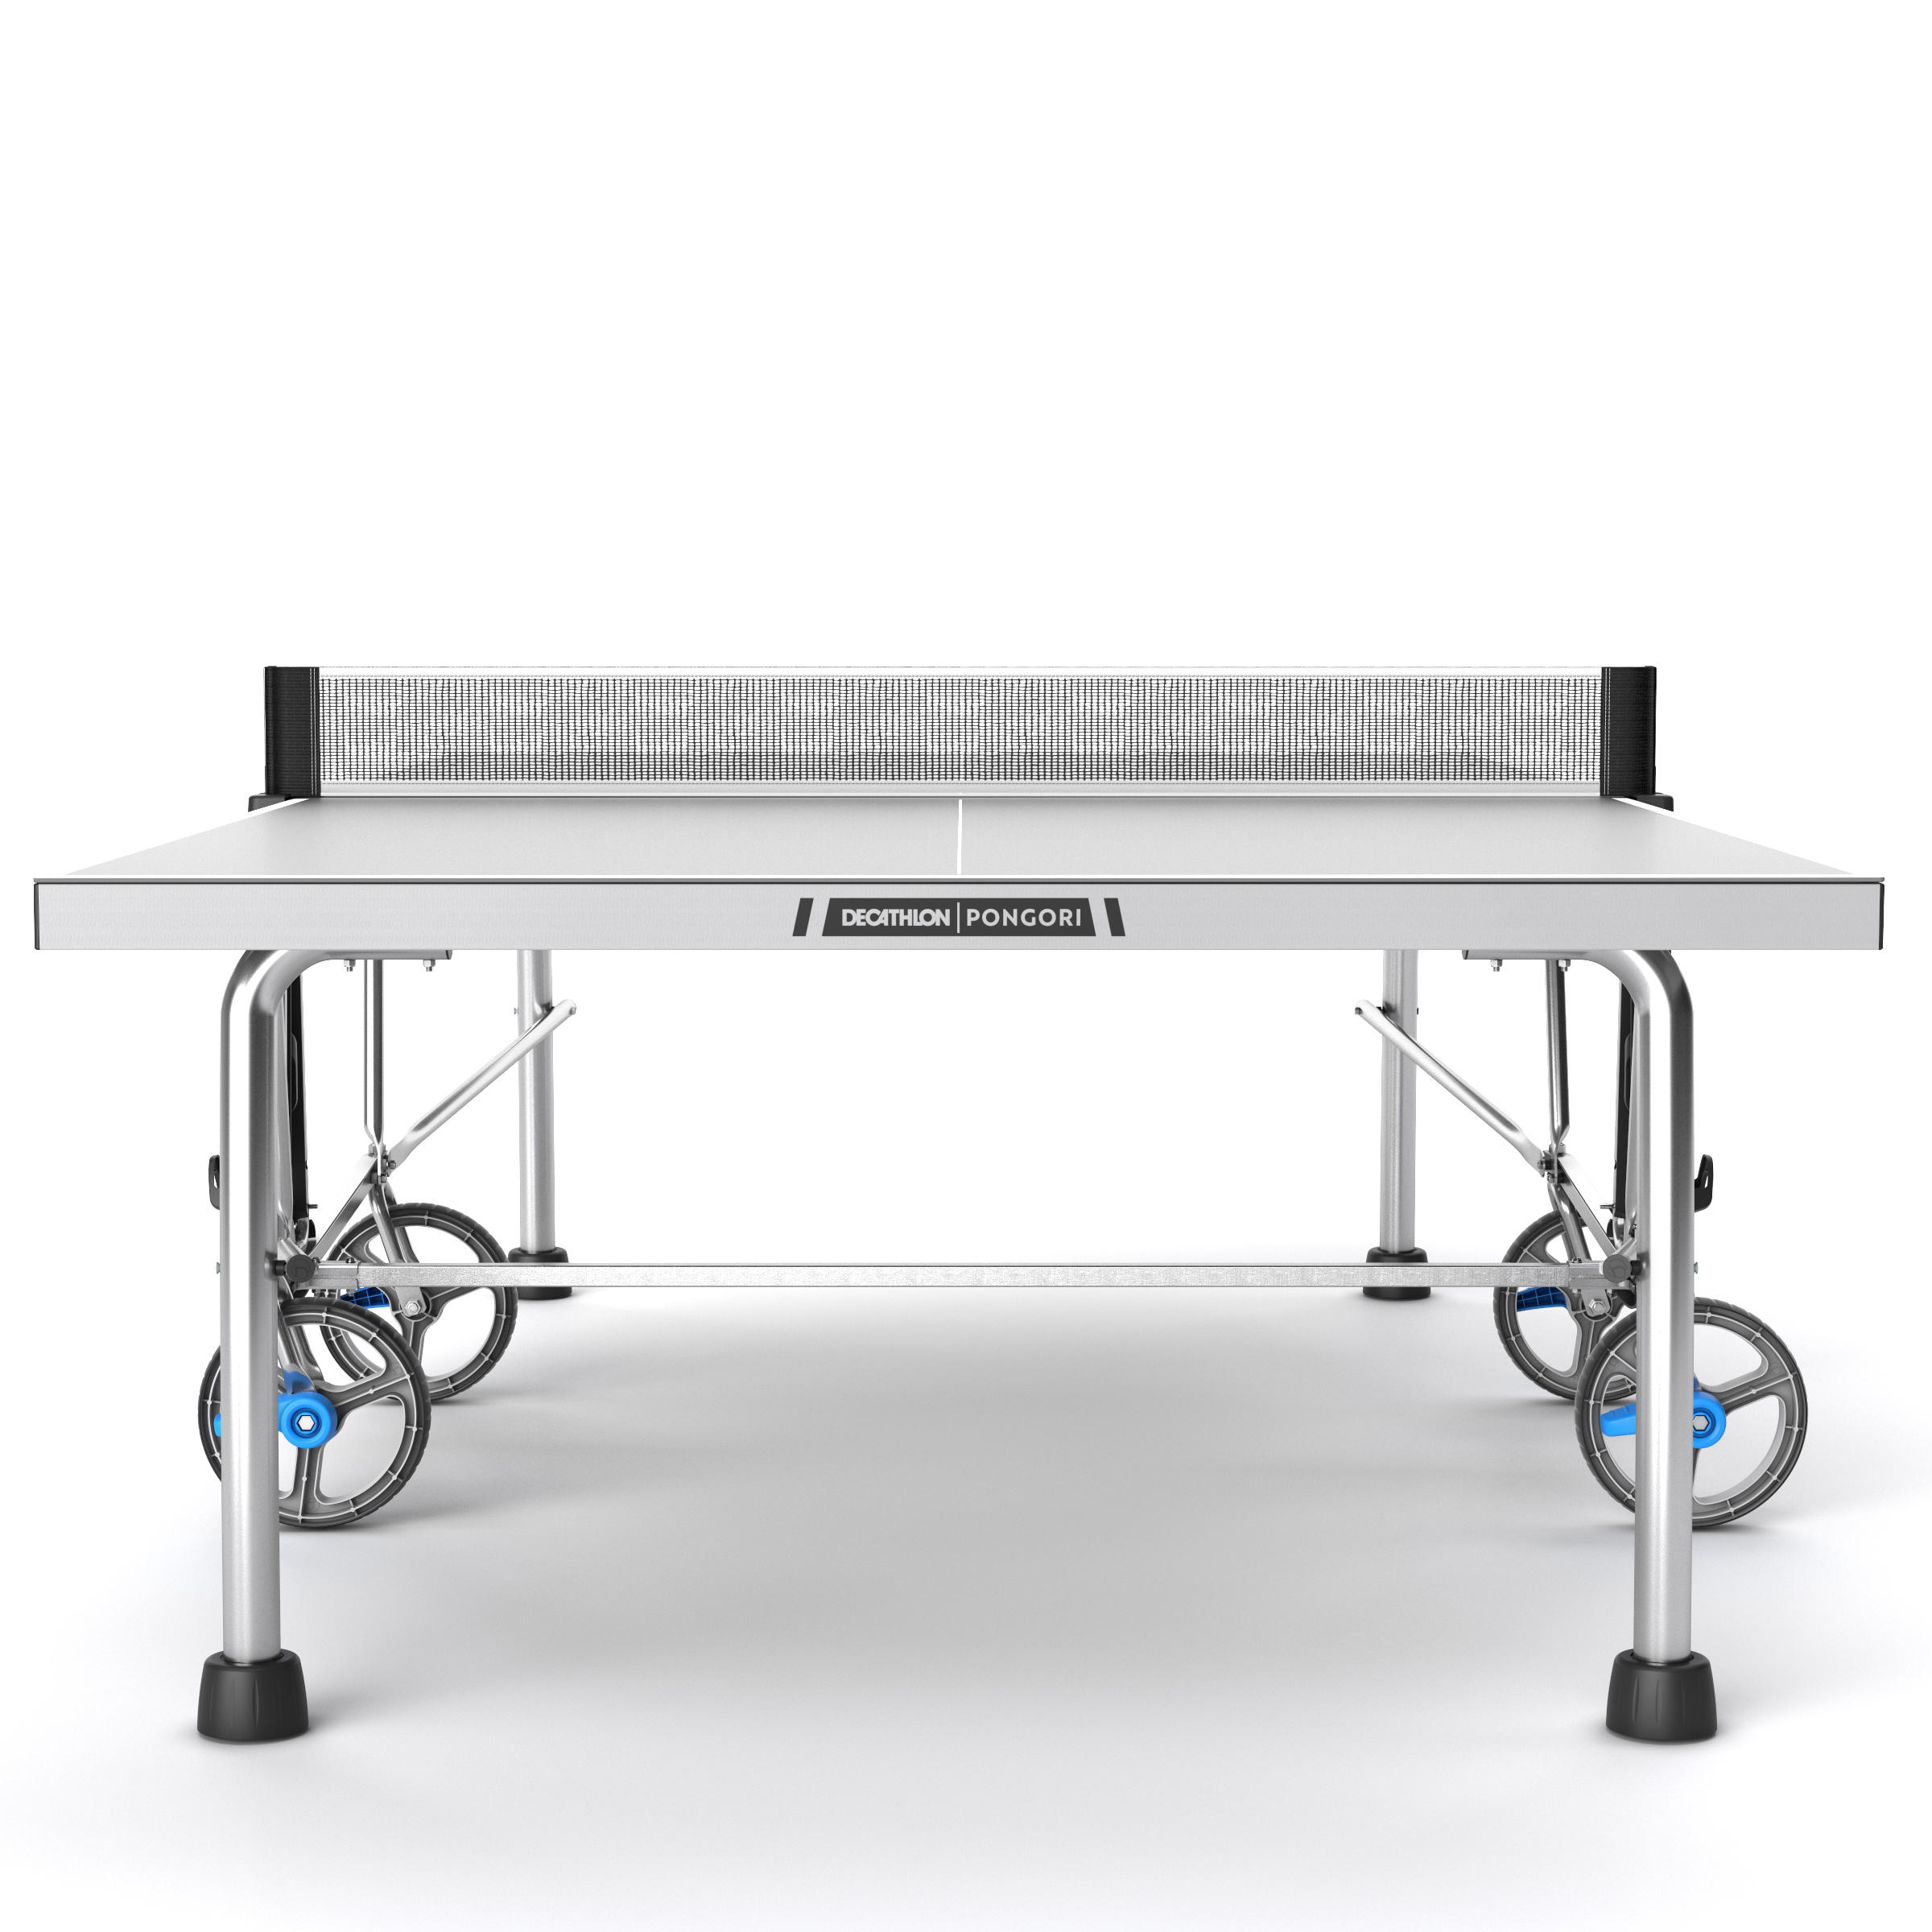 Outdoor Table Tennis Table PPT 900 - Grey 9/13